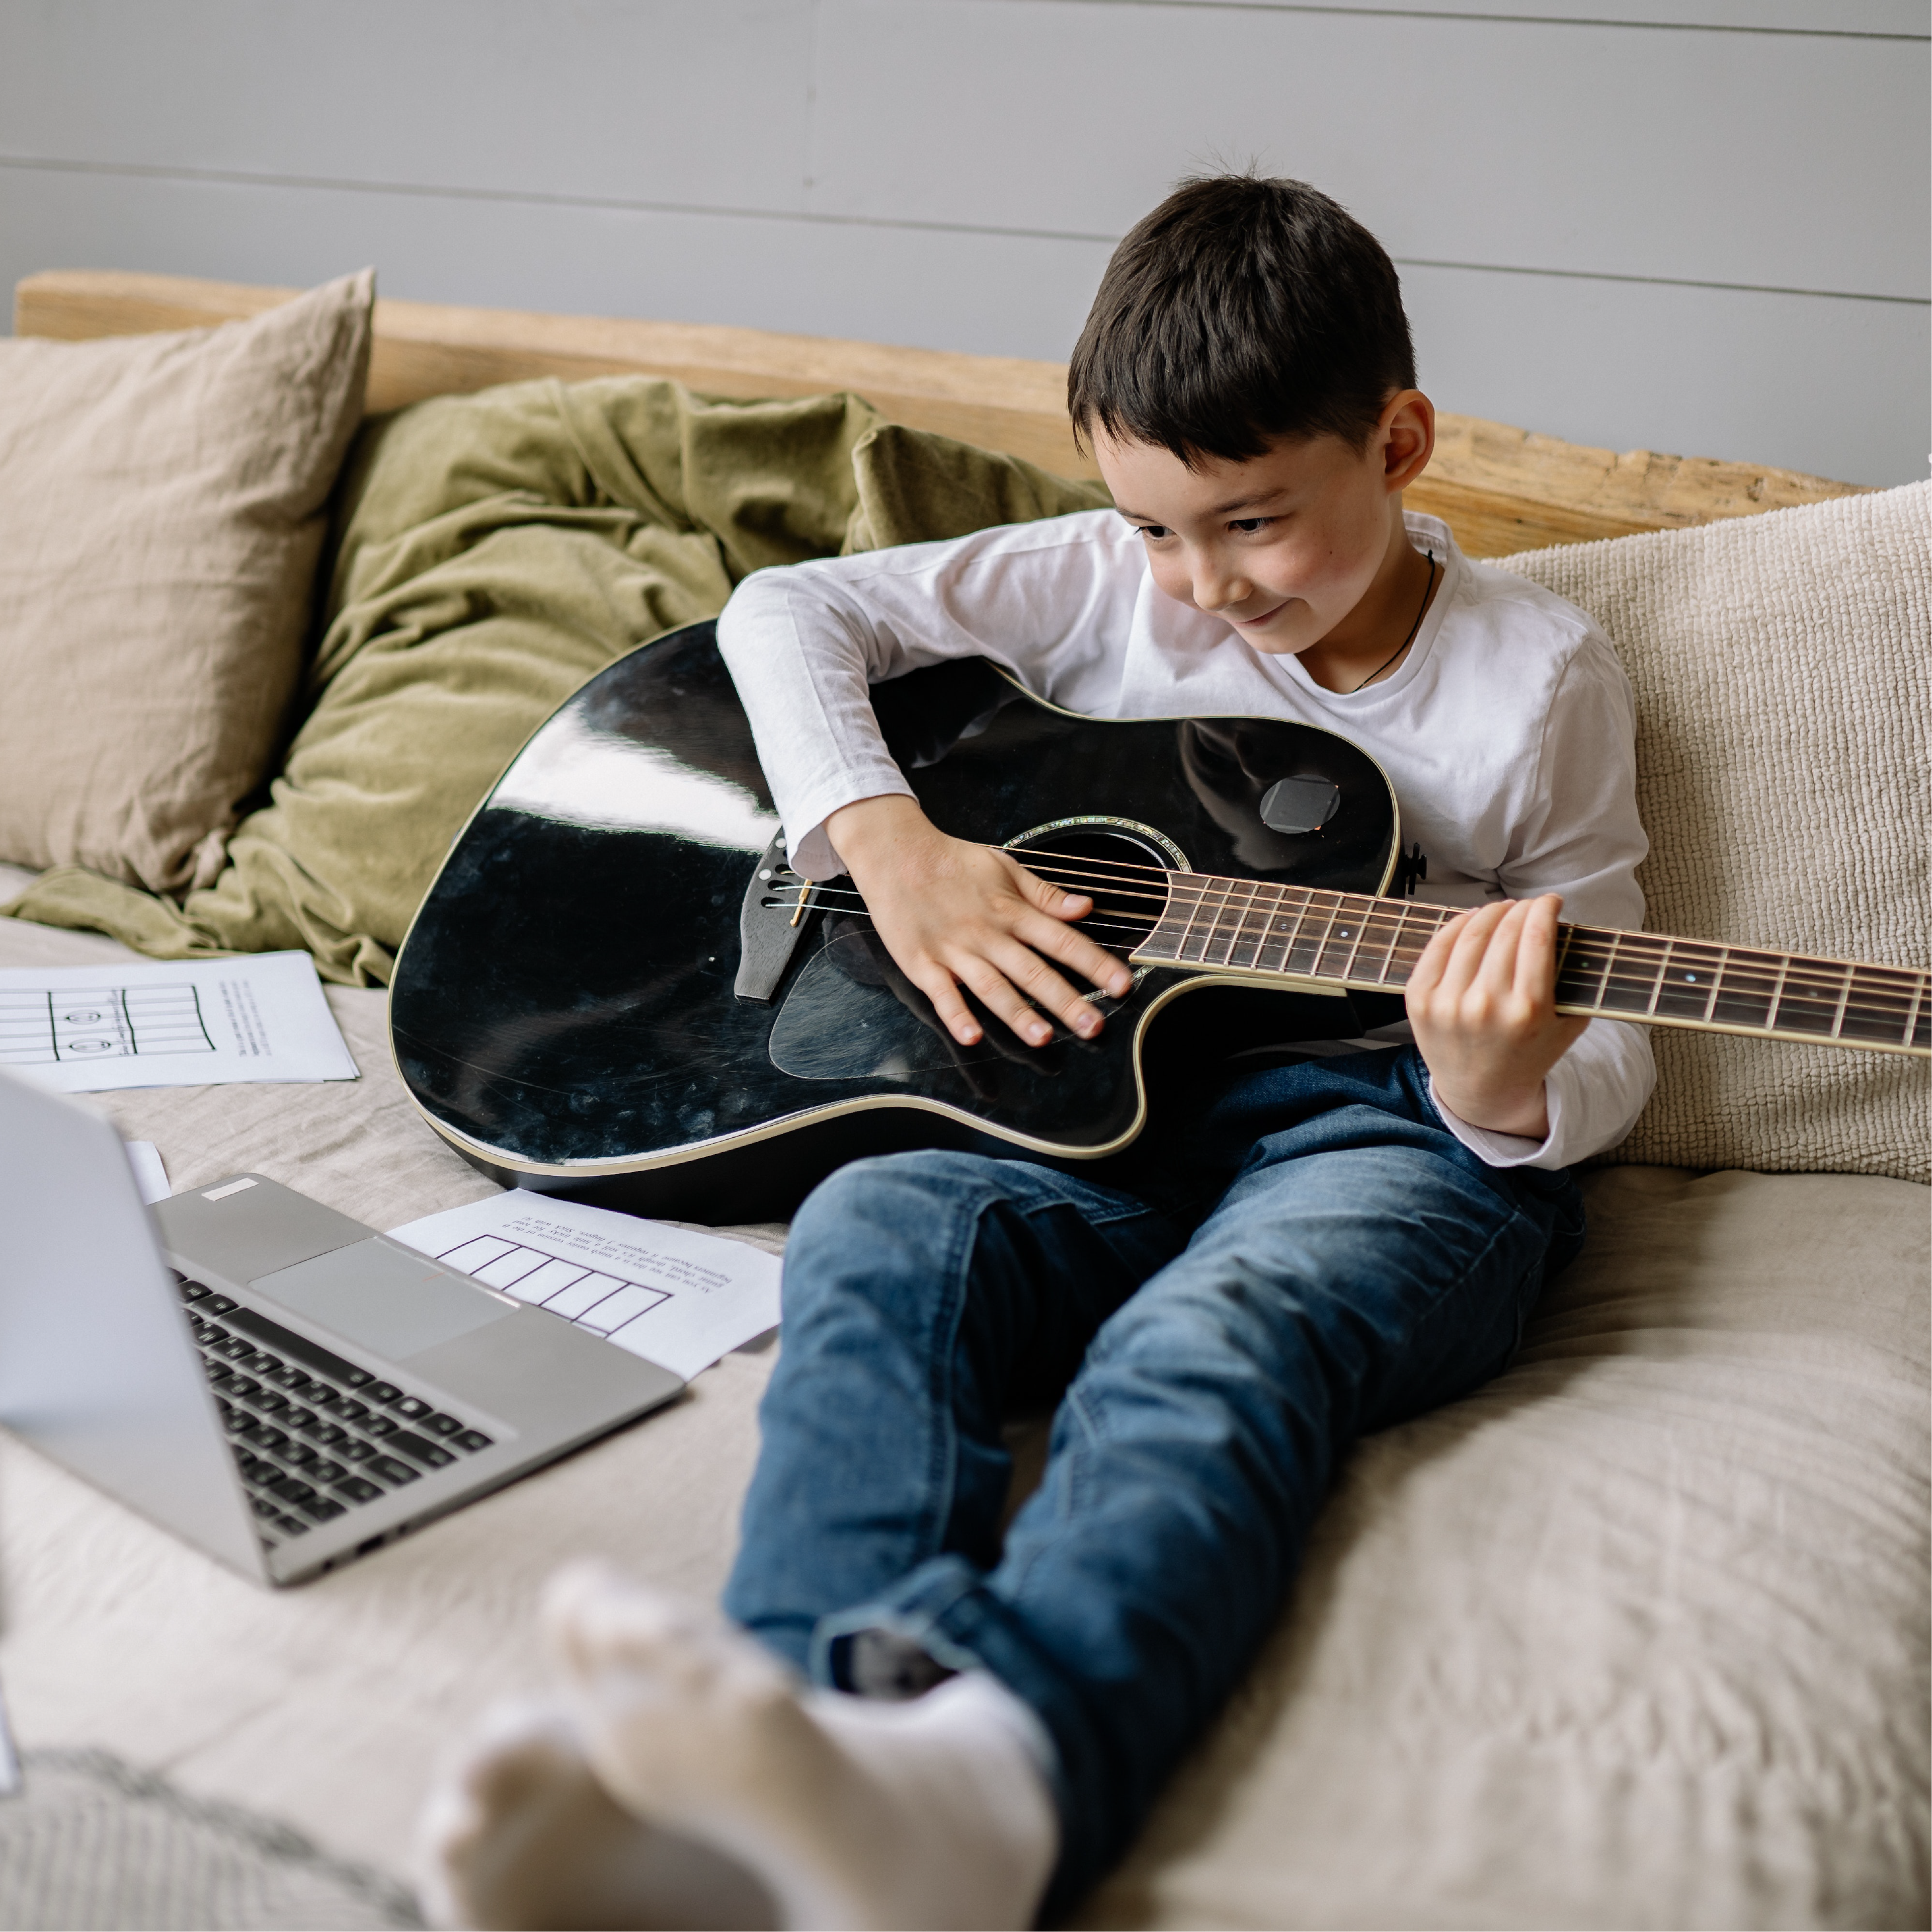 Boy Sitting on Bed with Acoustic Guitar Smiling at a Laptop by Yan Krukau